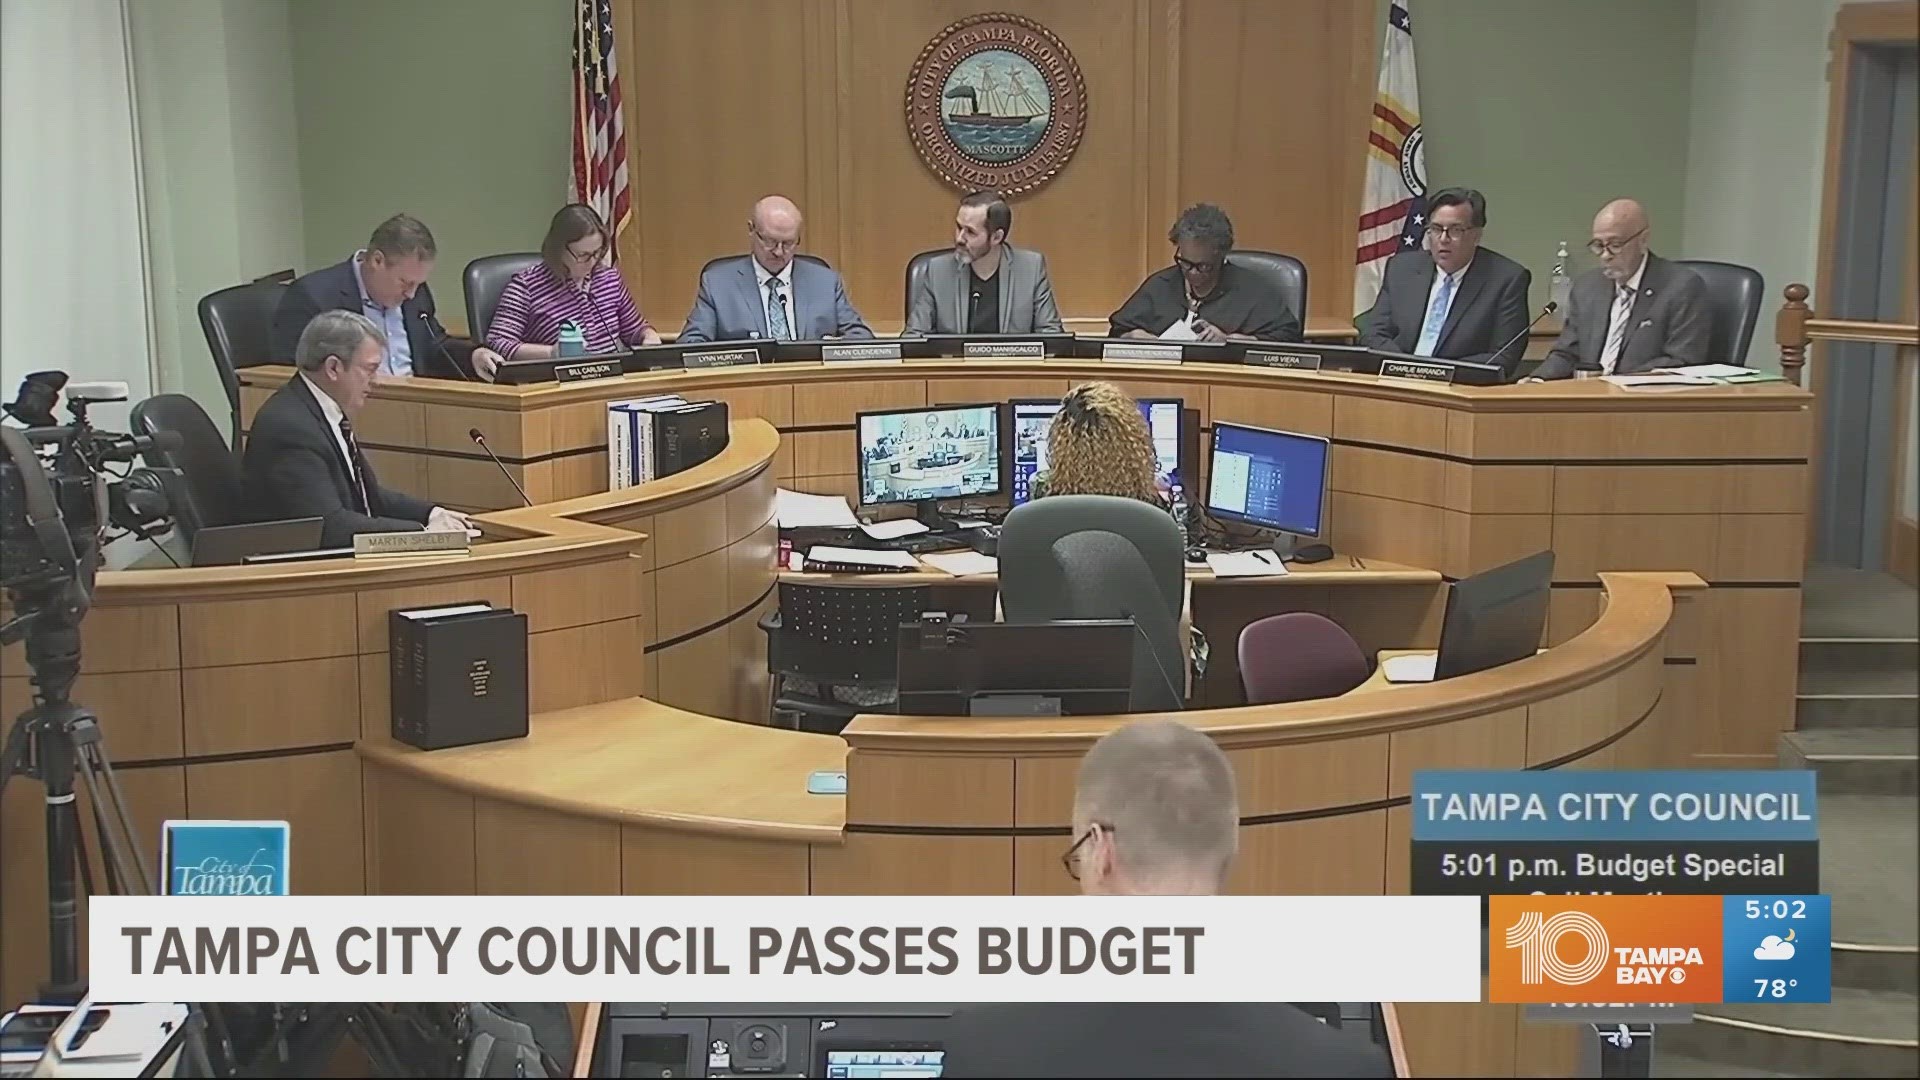 In the final public hearing for the budget, affordable housing took center stage.